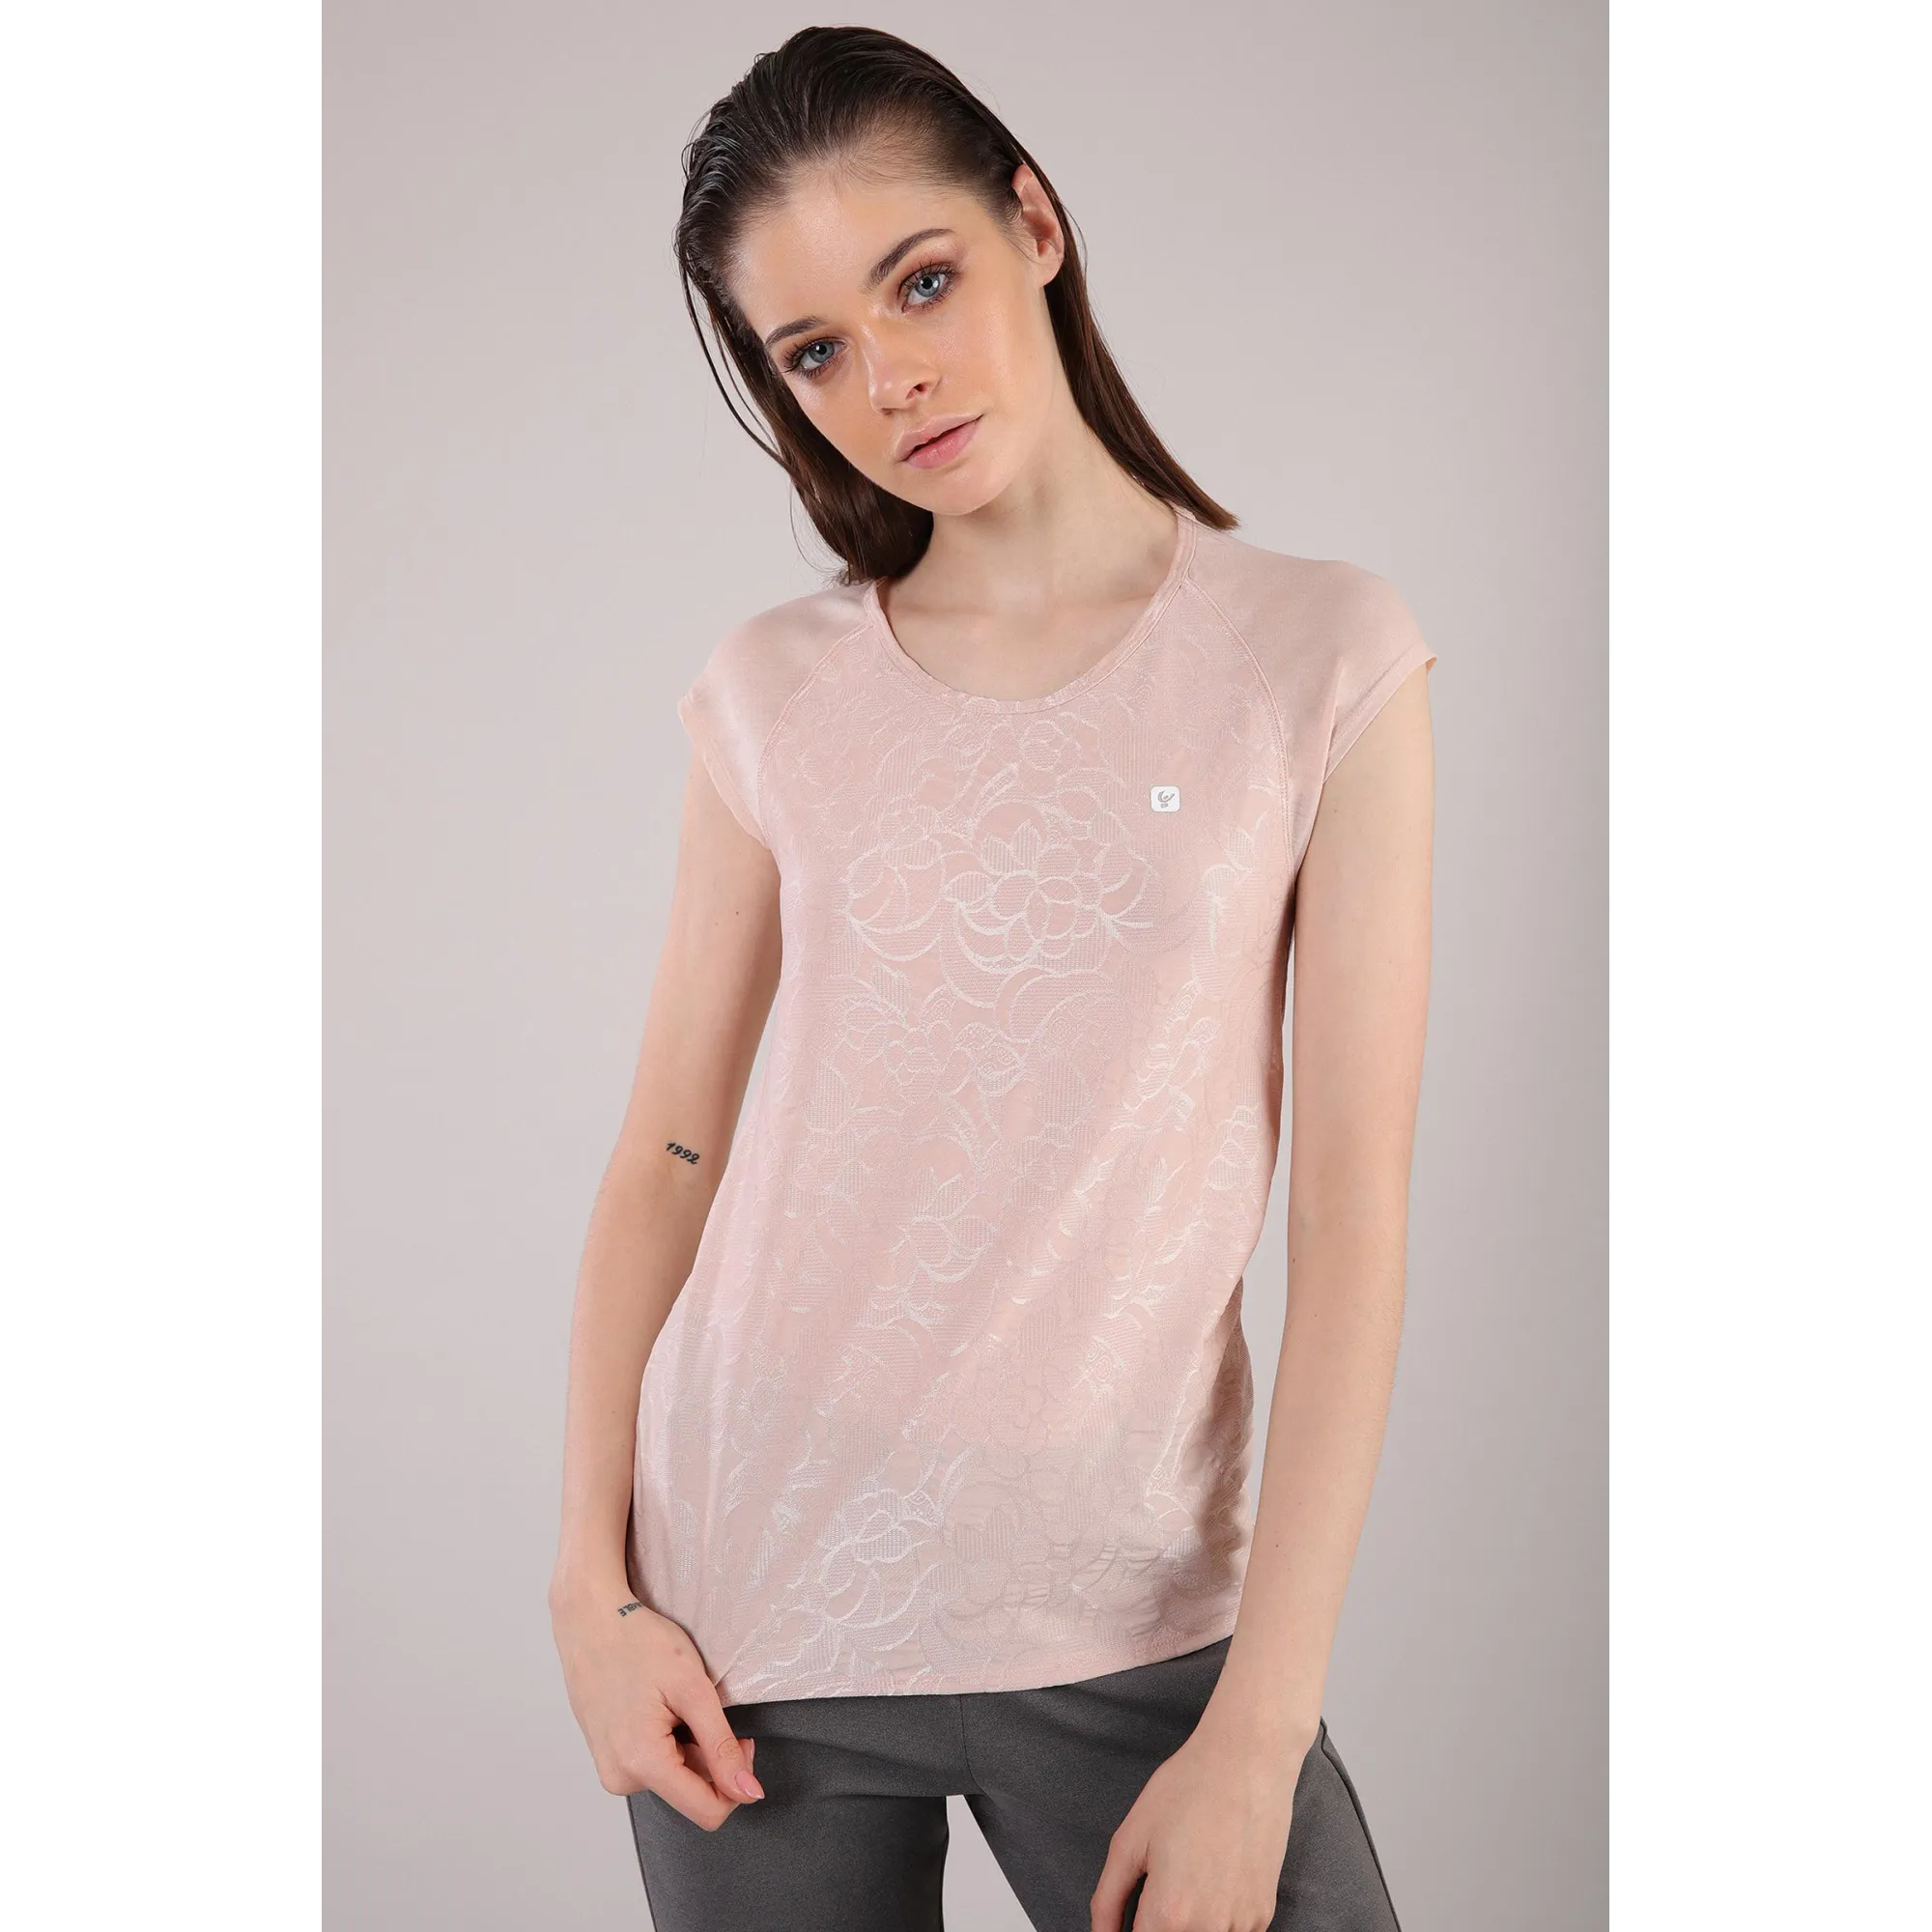 Yoga T-Shirt - Made in Italy - Cameo Rosé - P1060